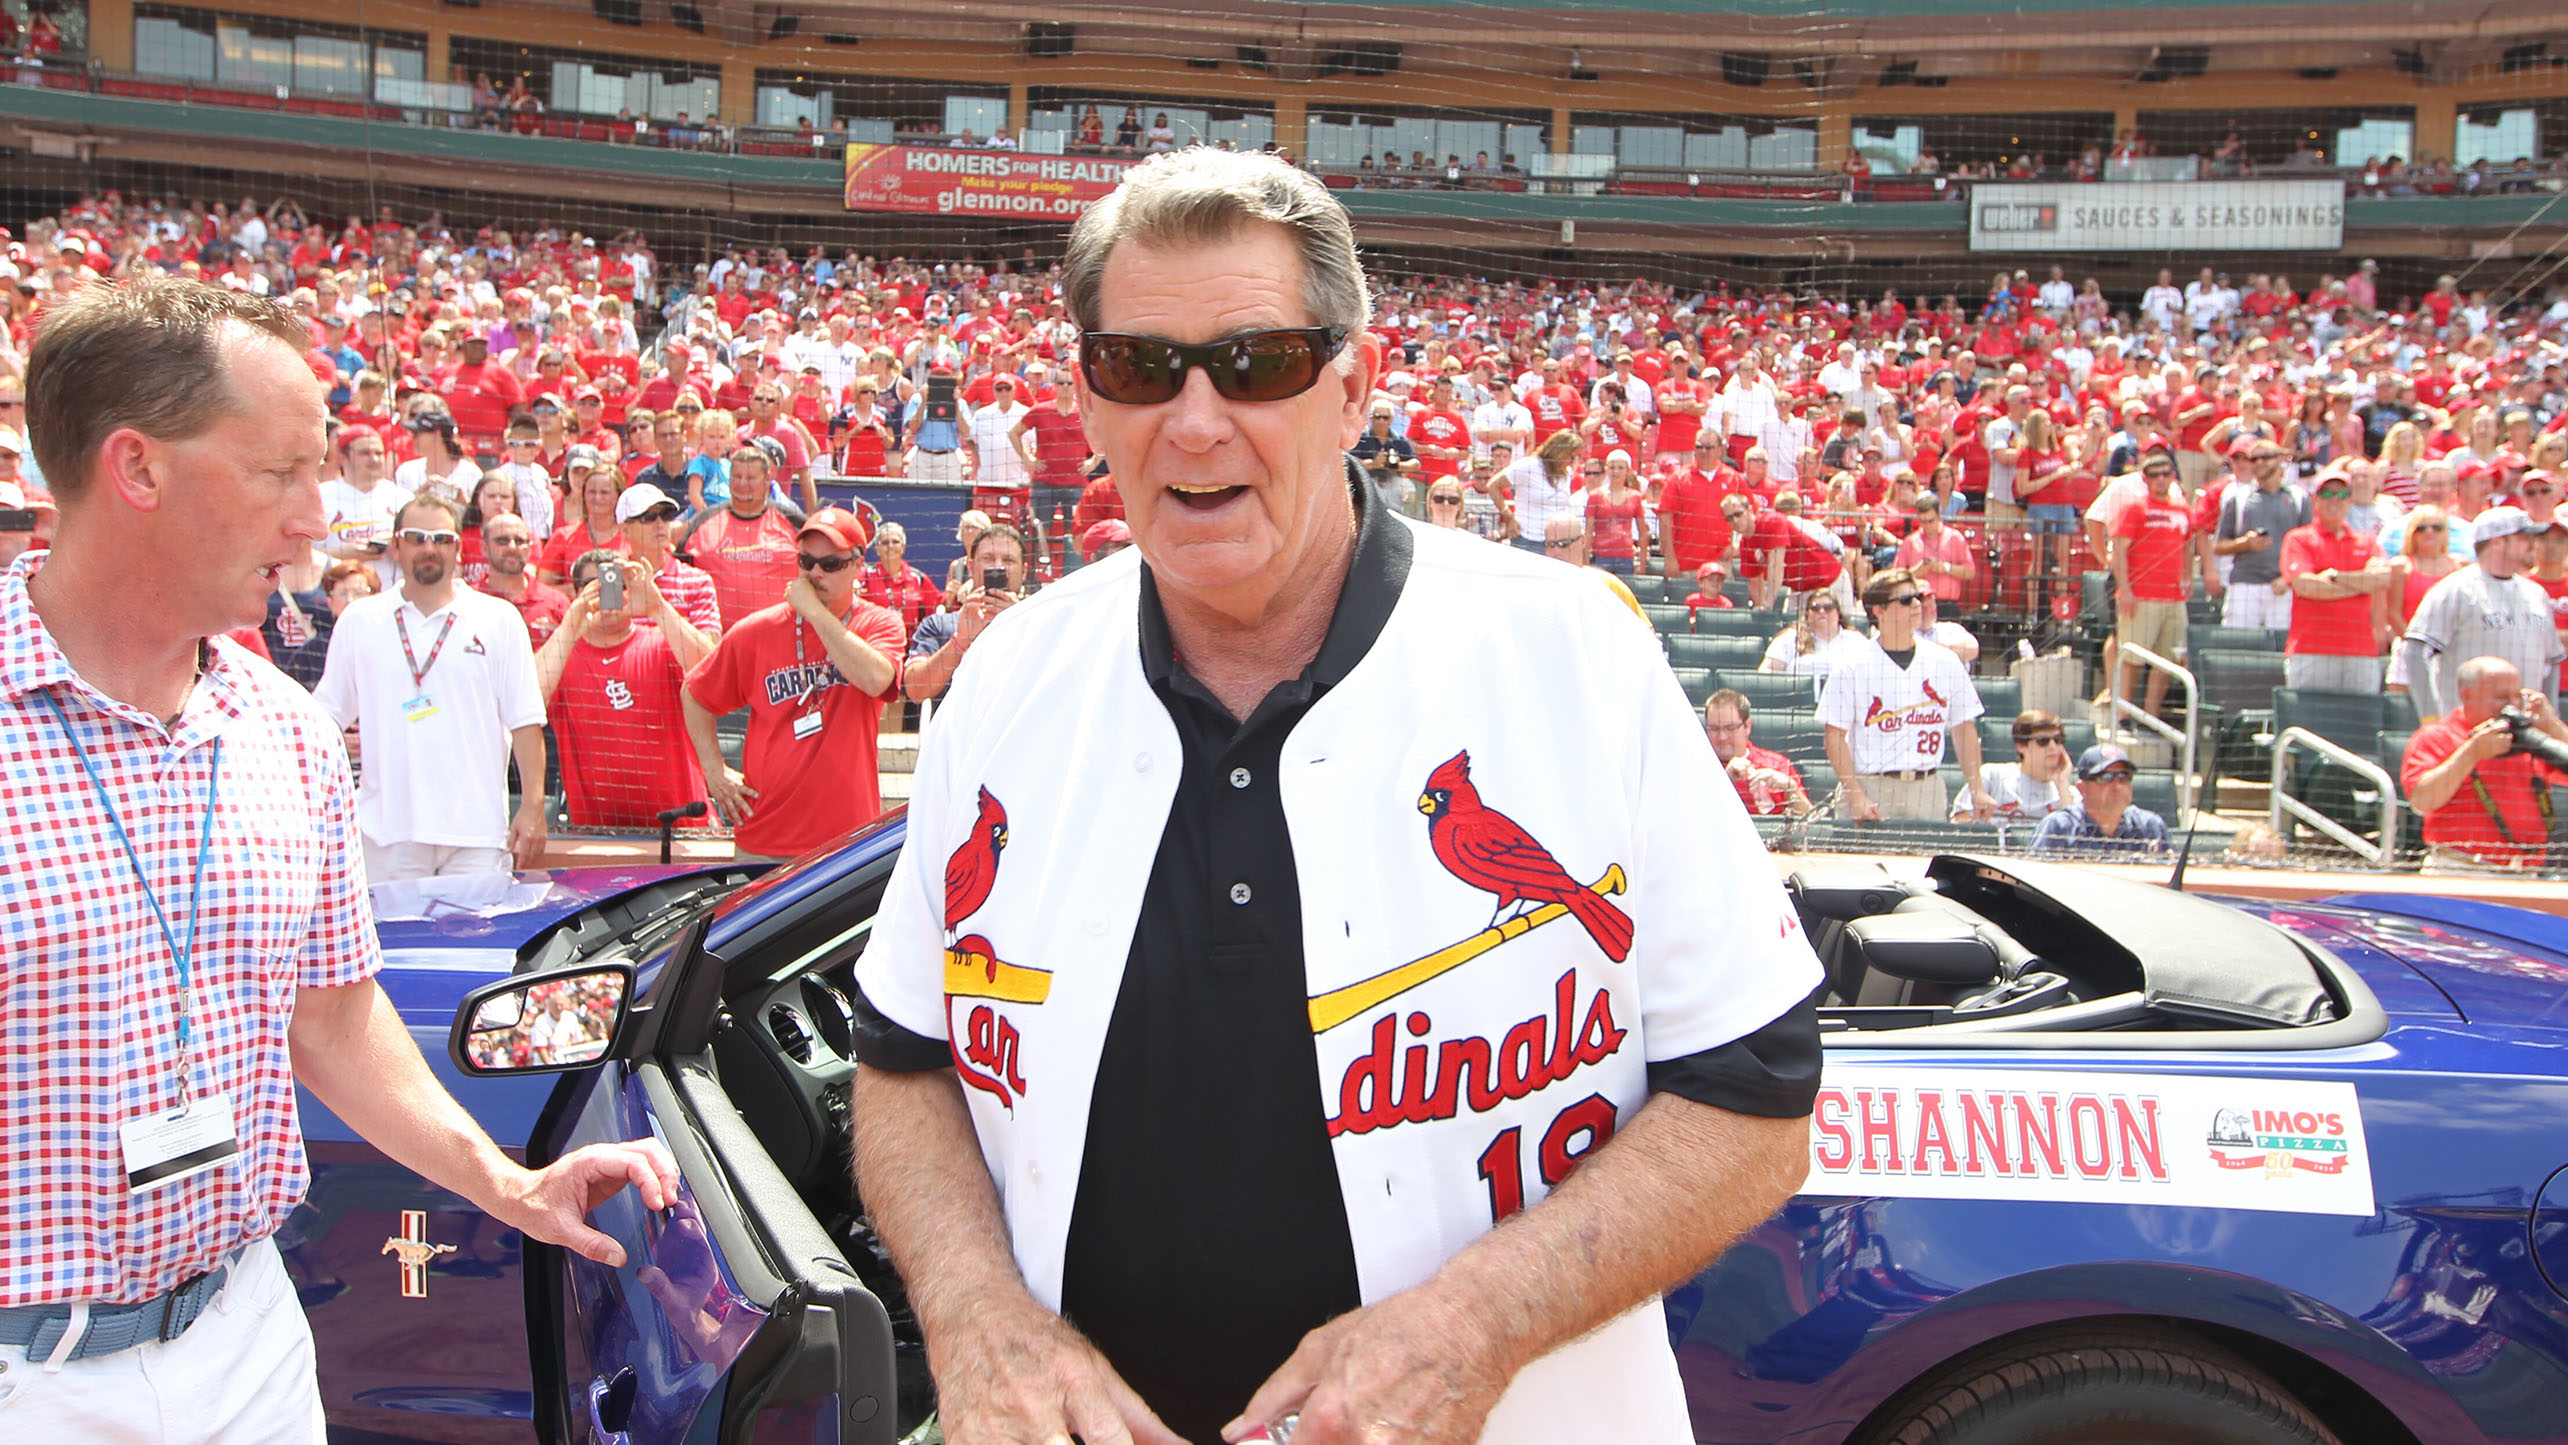 Cardinals fans mourning the loss of Mike Shannon - News from Rob